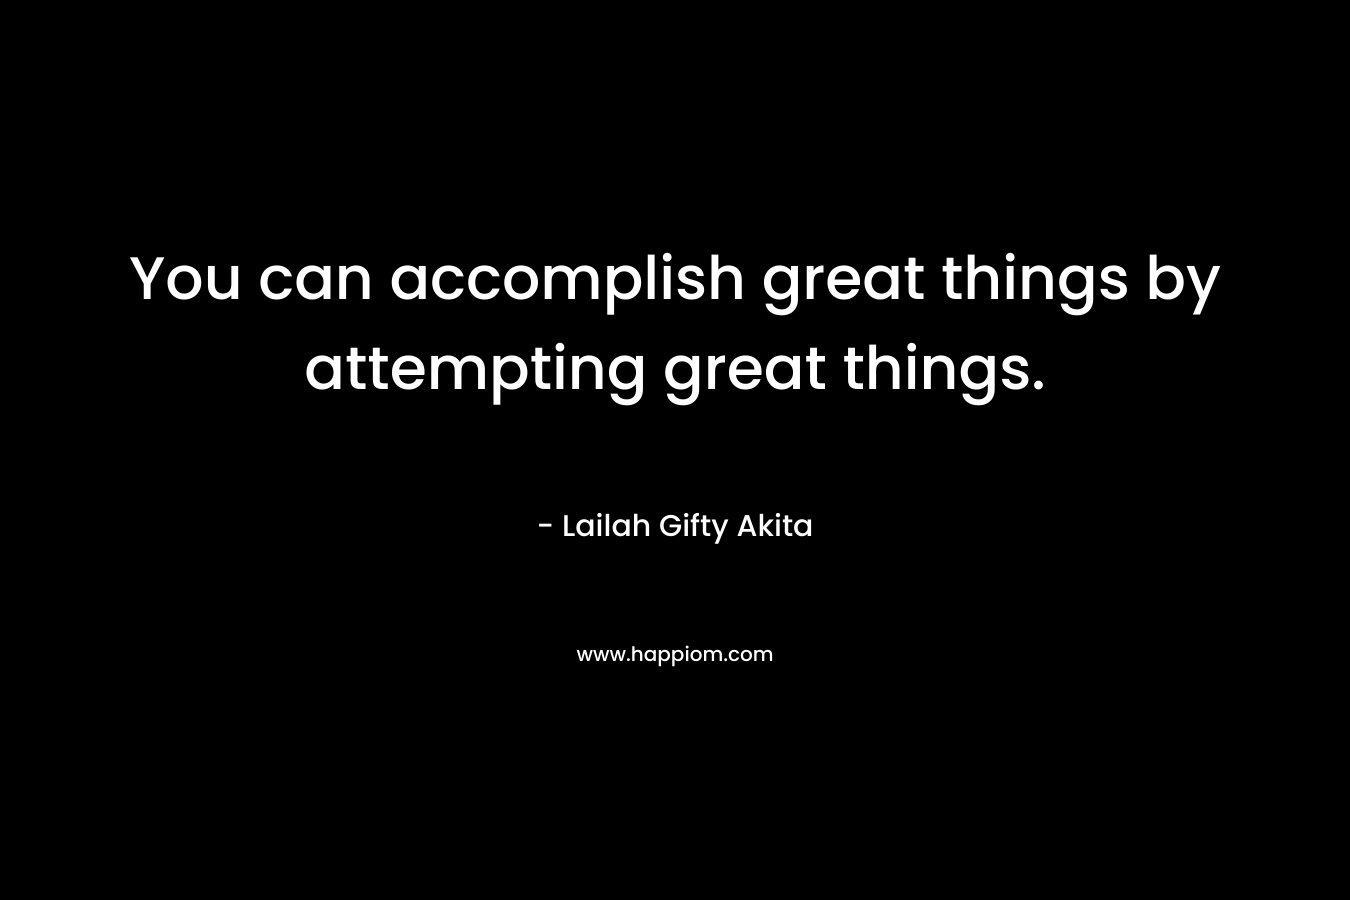 You can accomplish great things by attempting great things.